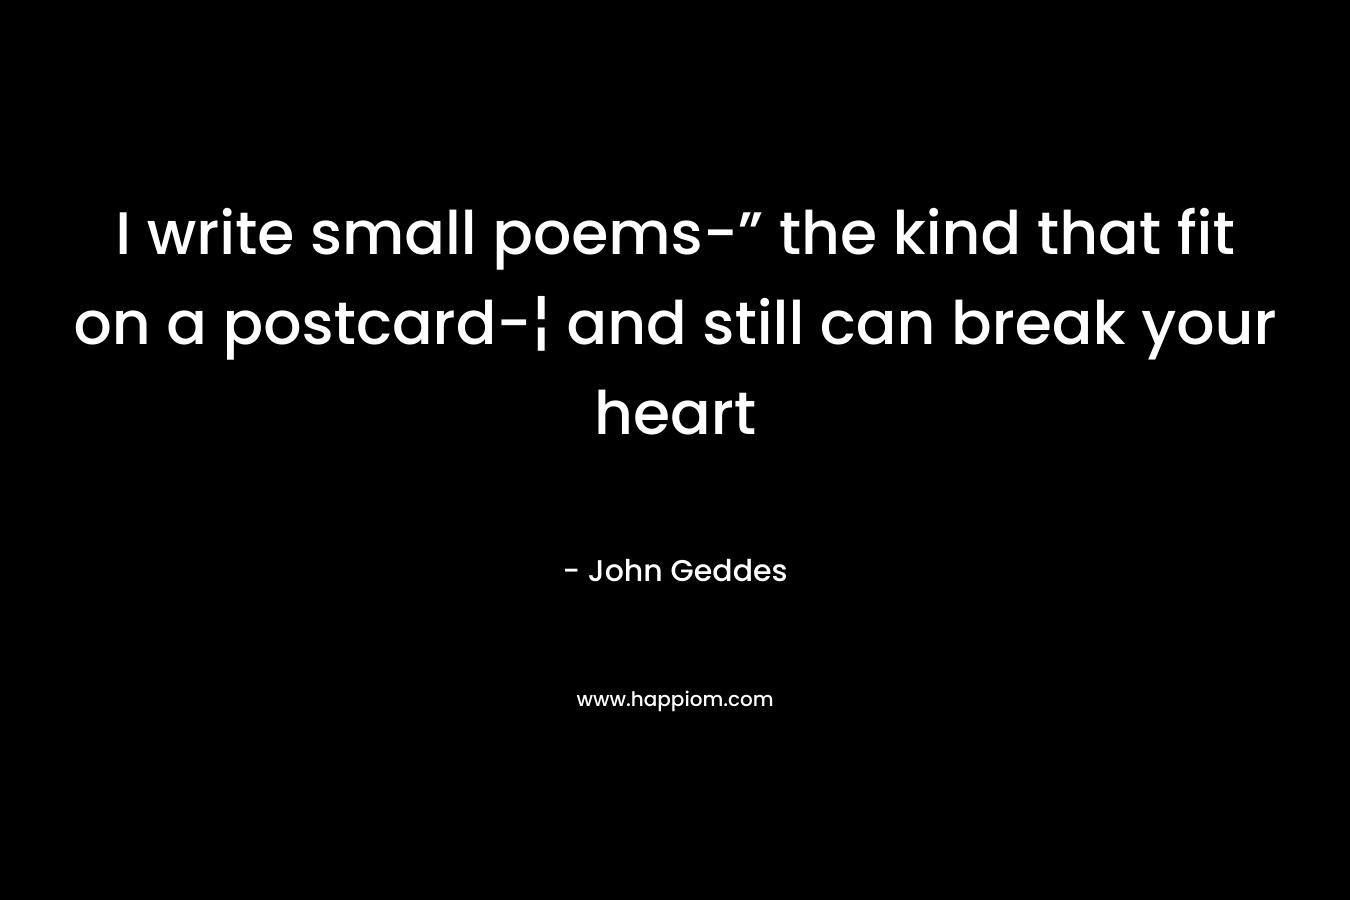 I write small poems-” the kind that fit on a postcard-¦ and still can break your heart